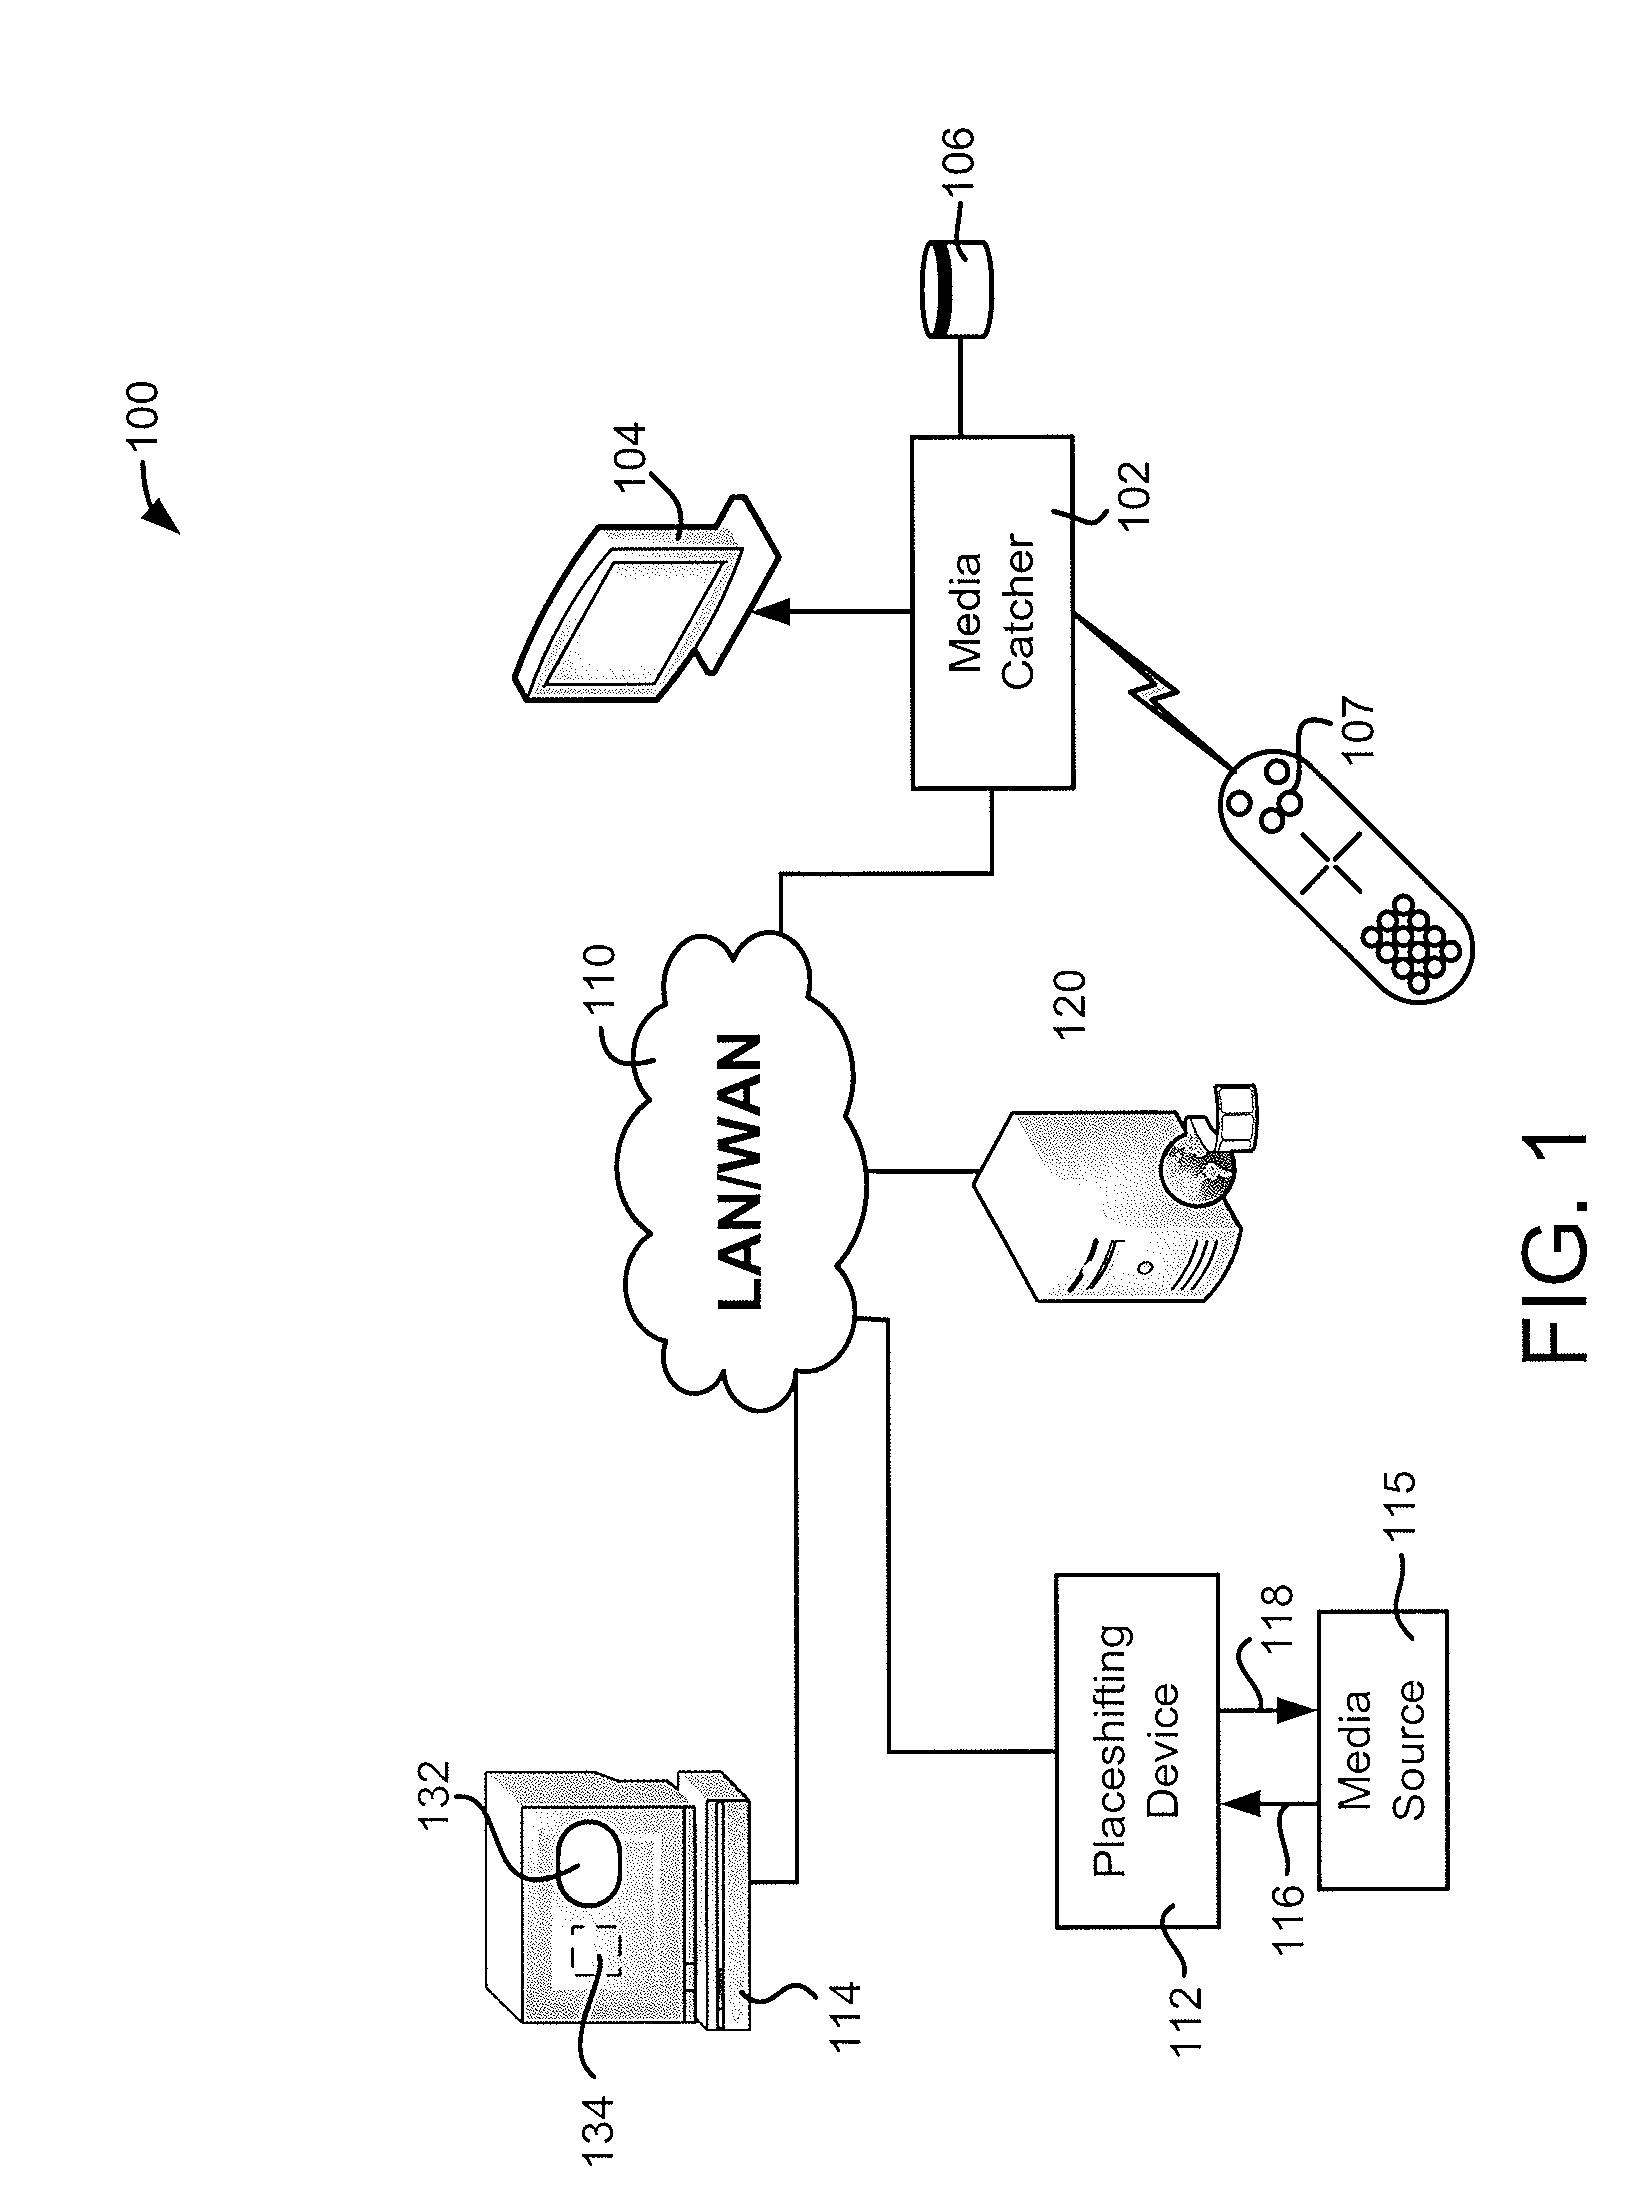 Systems and methods for presenting media content obtained from multiple sources